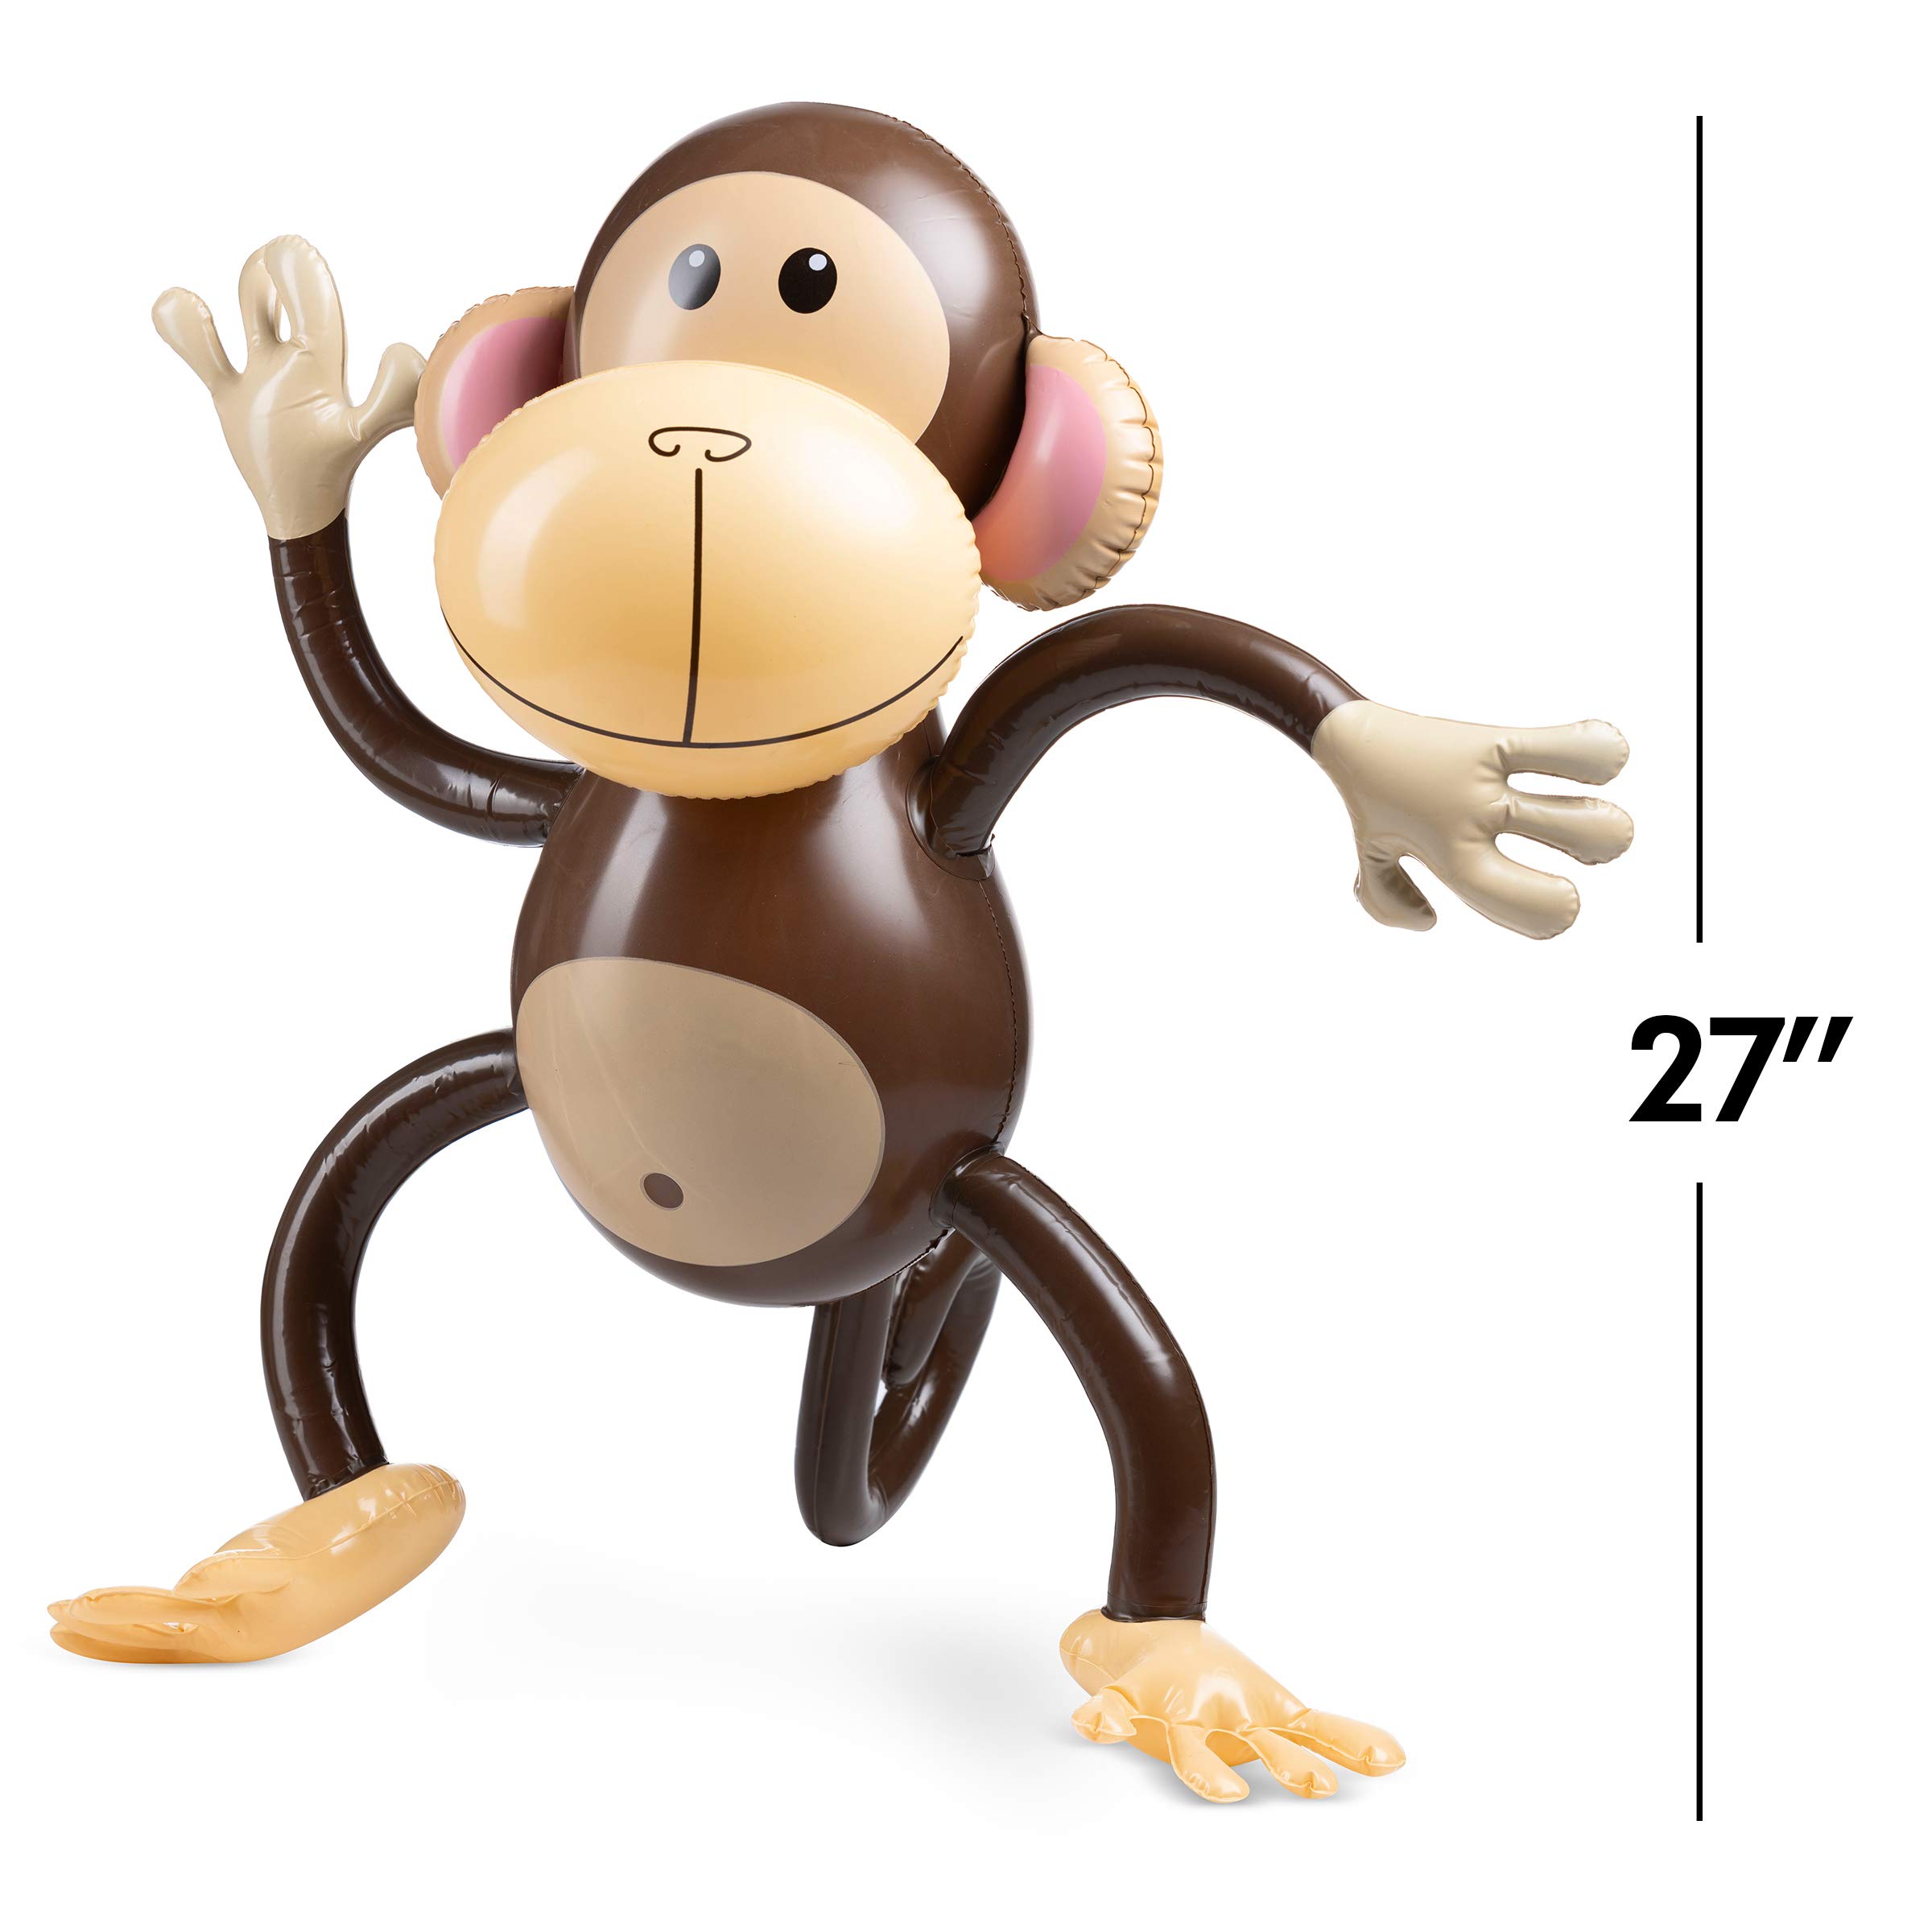 Bedwina Large Inflatable Monkey (Pack of 3) 27-Inch Monkeys for Baby Shower, Safari, Jungle Themed Birthdays, Blow Up Animal Party Favor